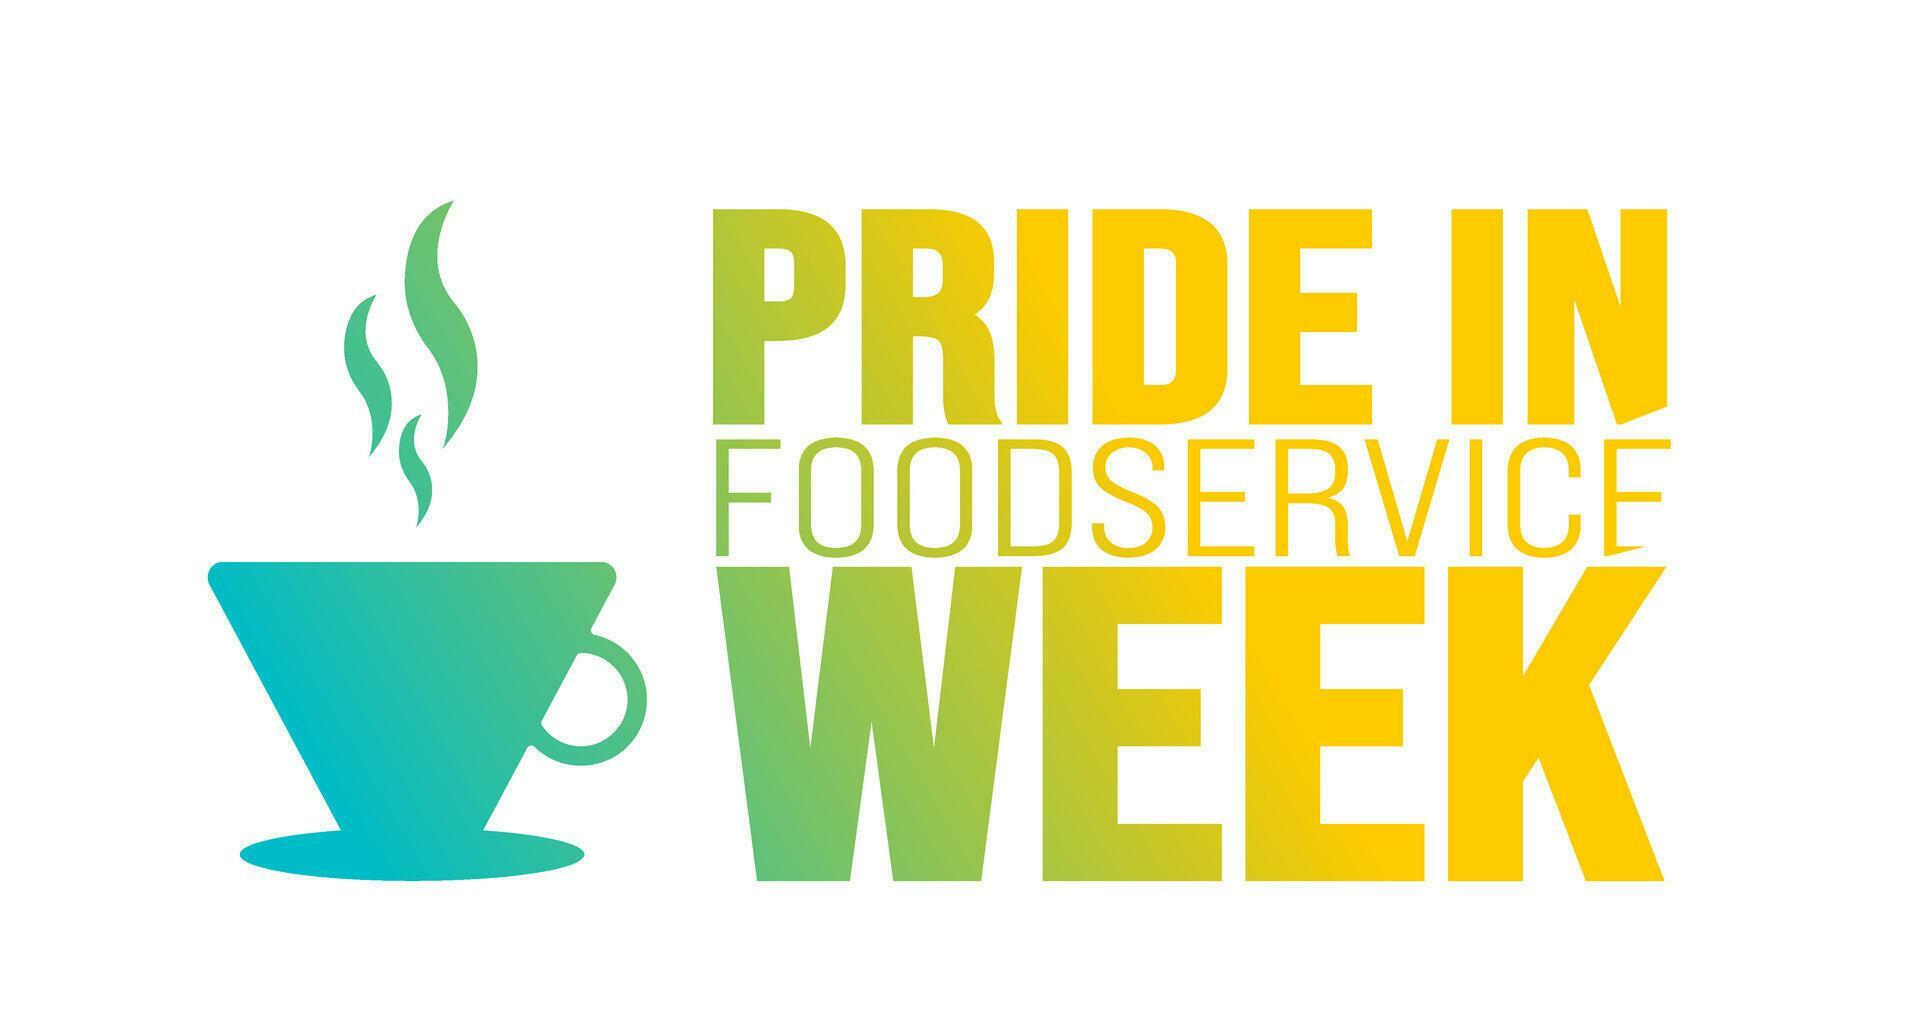 February is Pride in foodservice week background template. Holiday